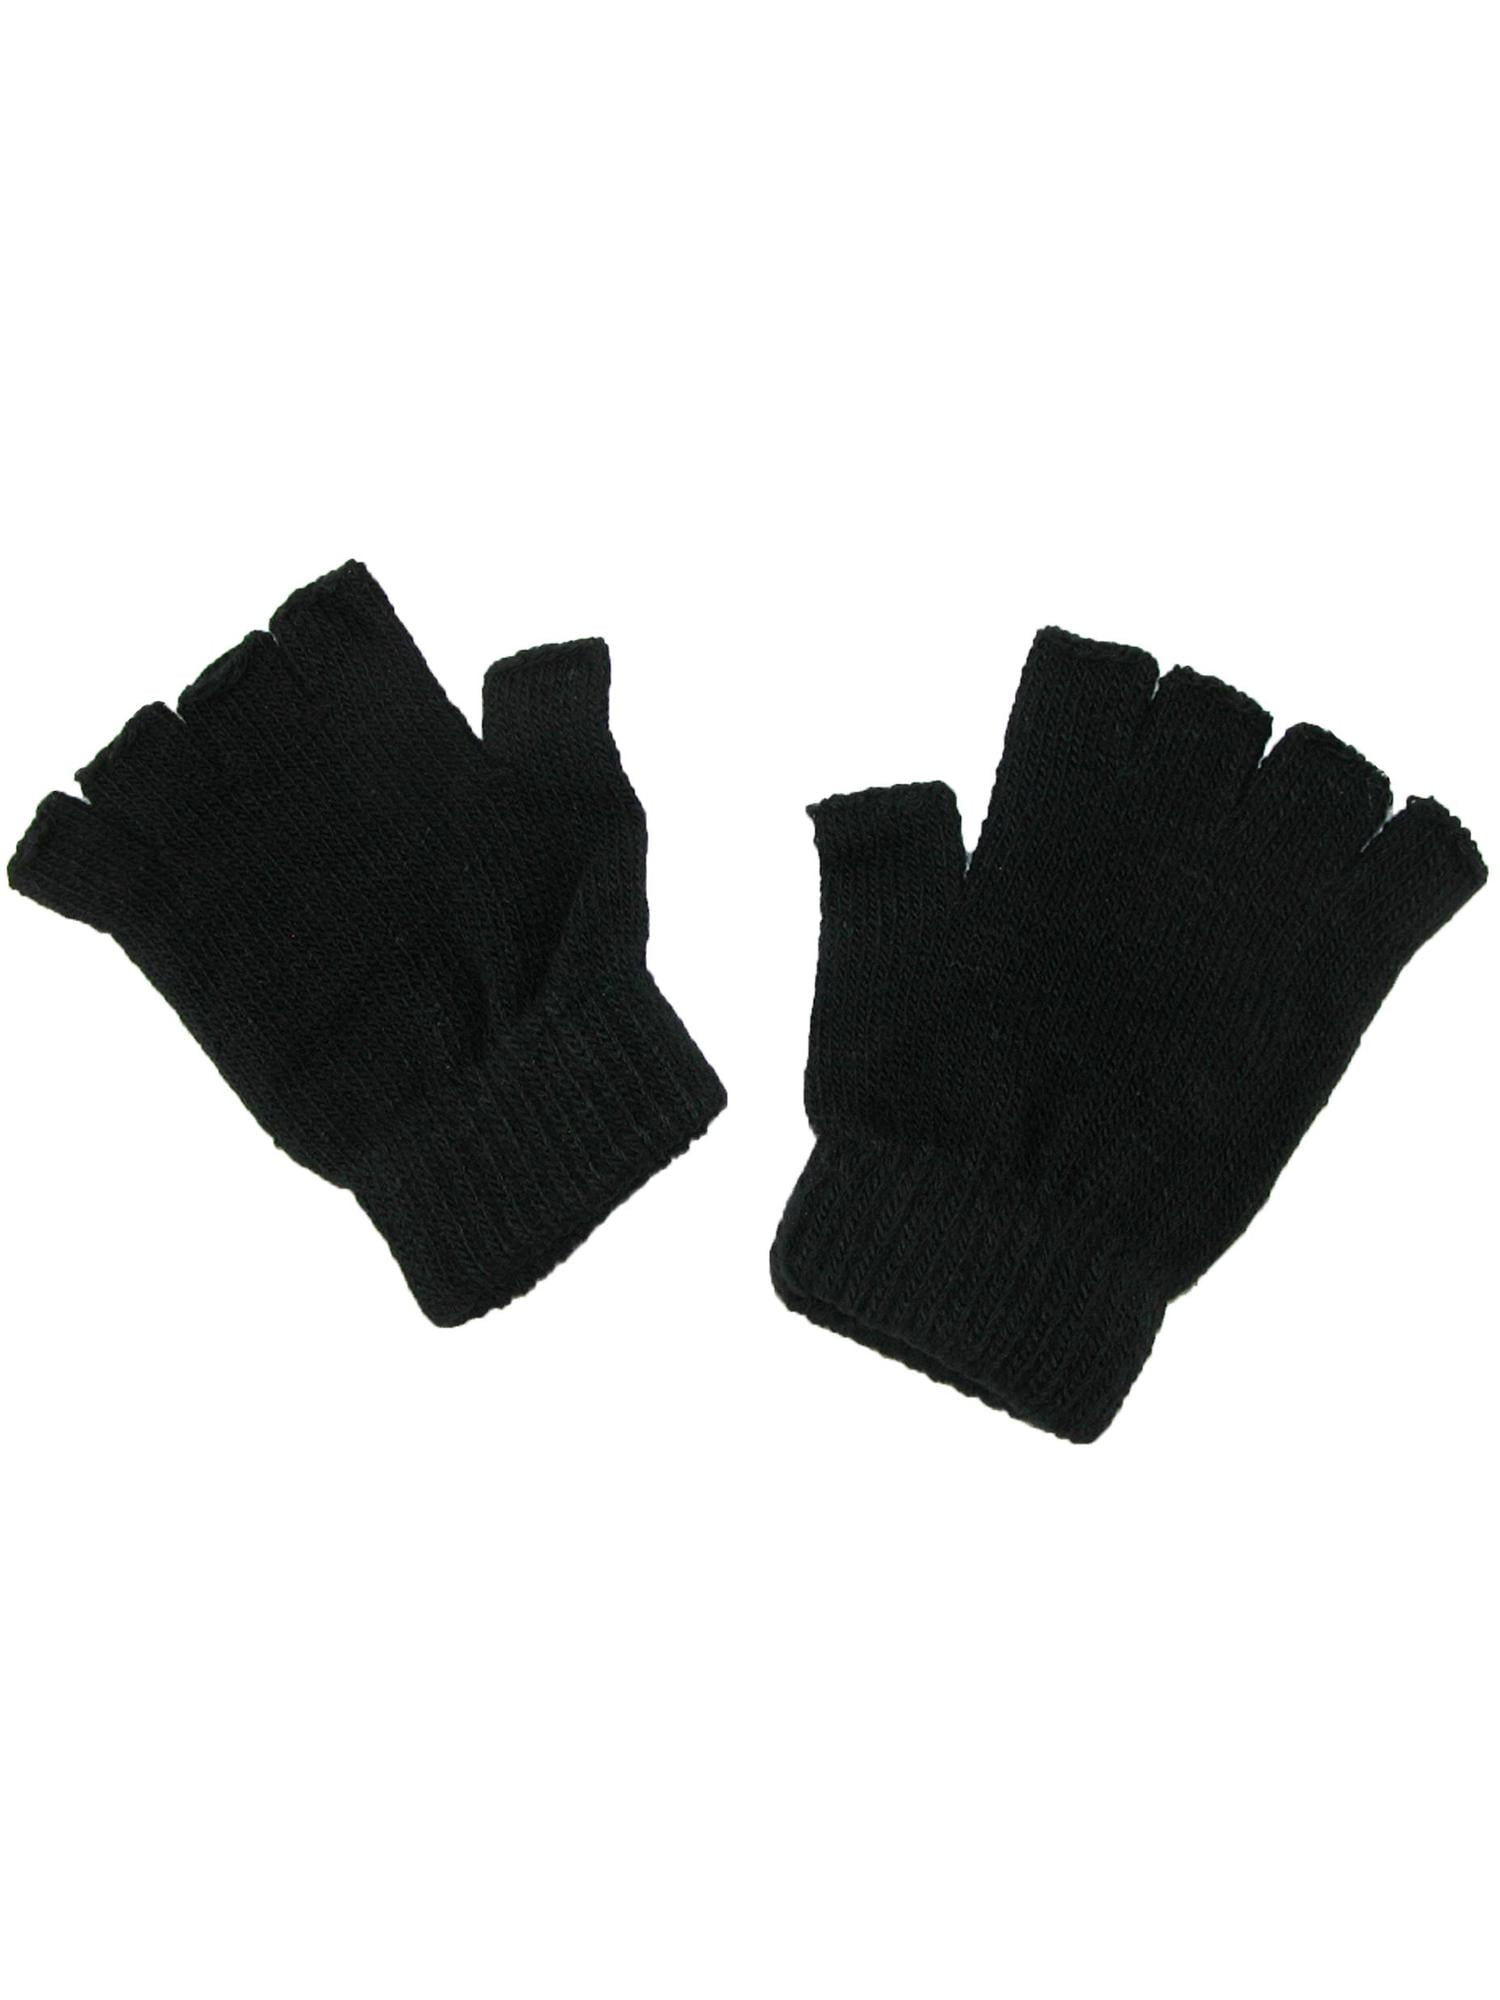 One Size 1 Mens Fingerless Magic Stretch Gloves 